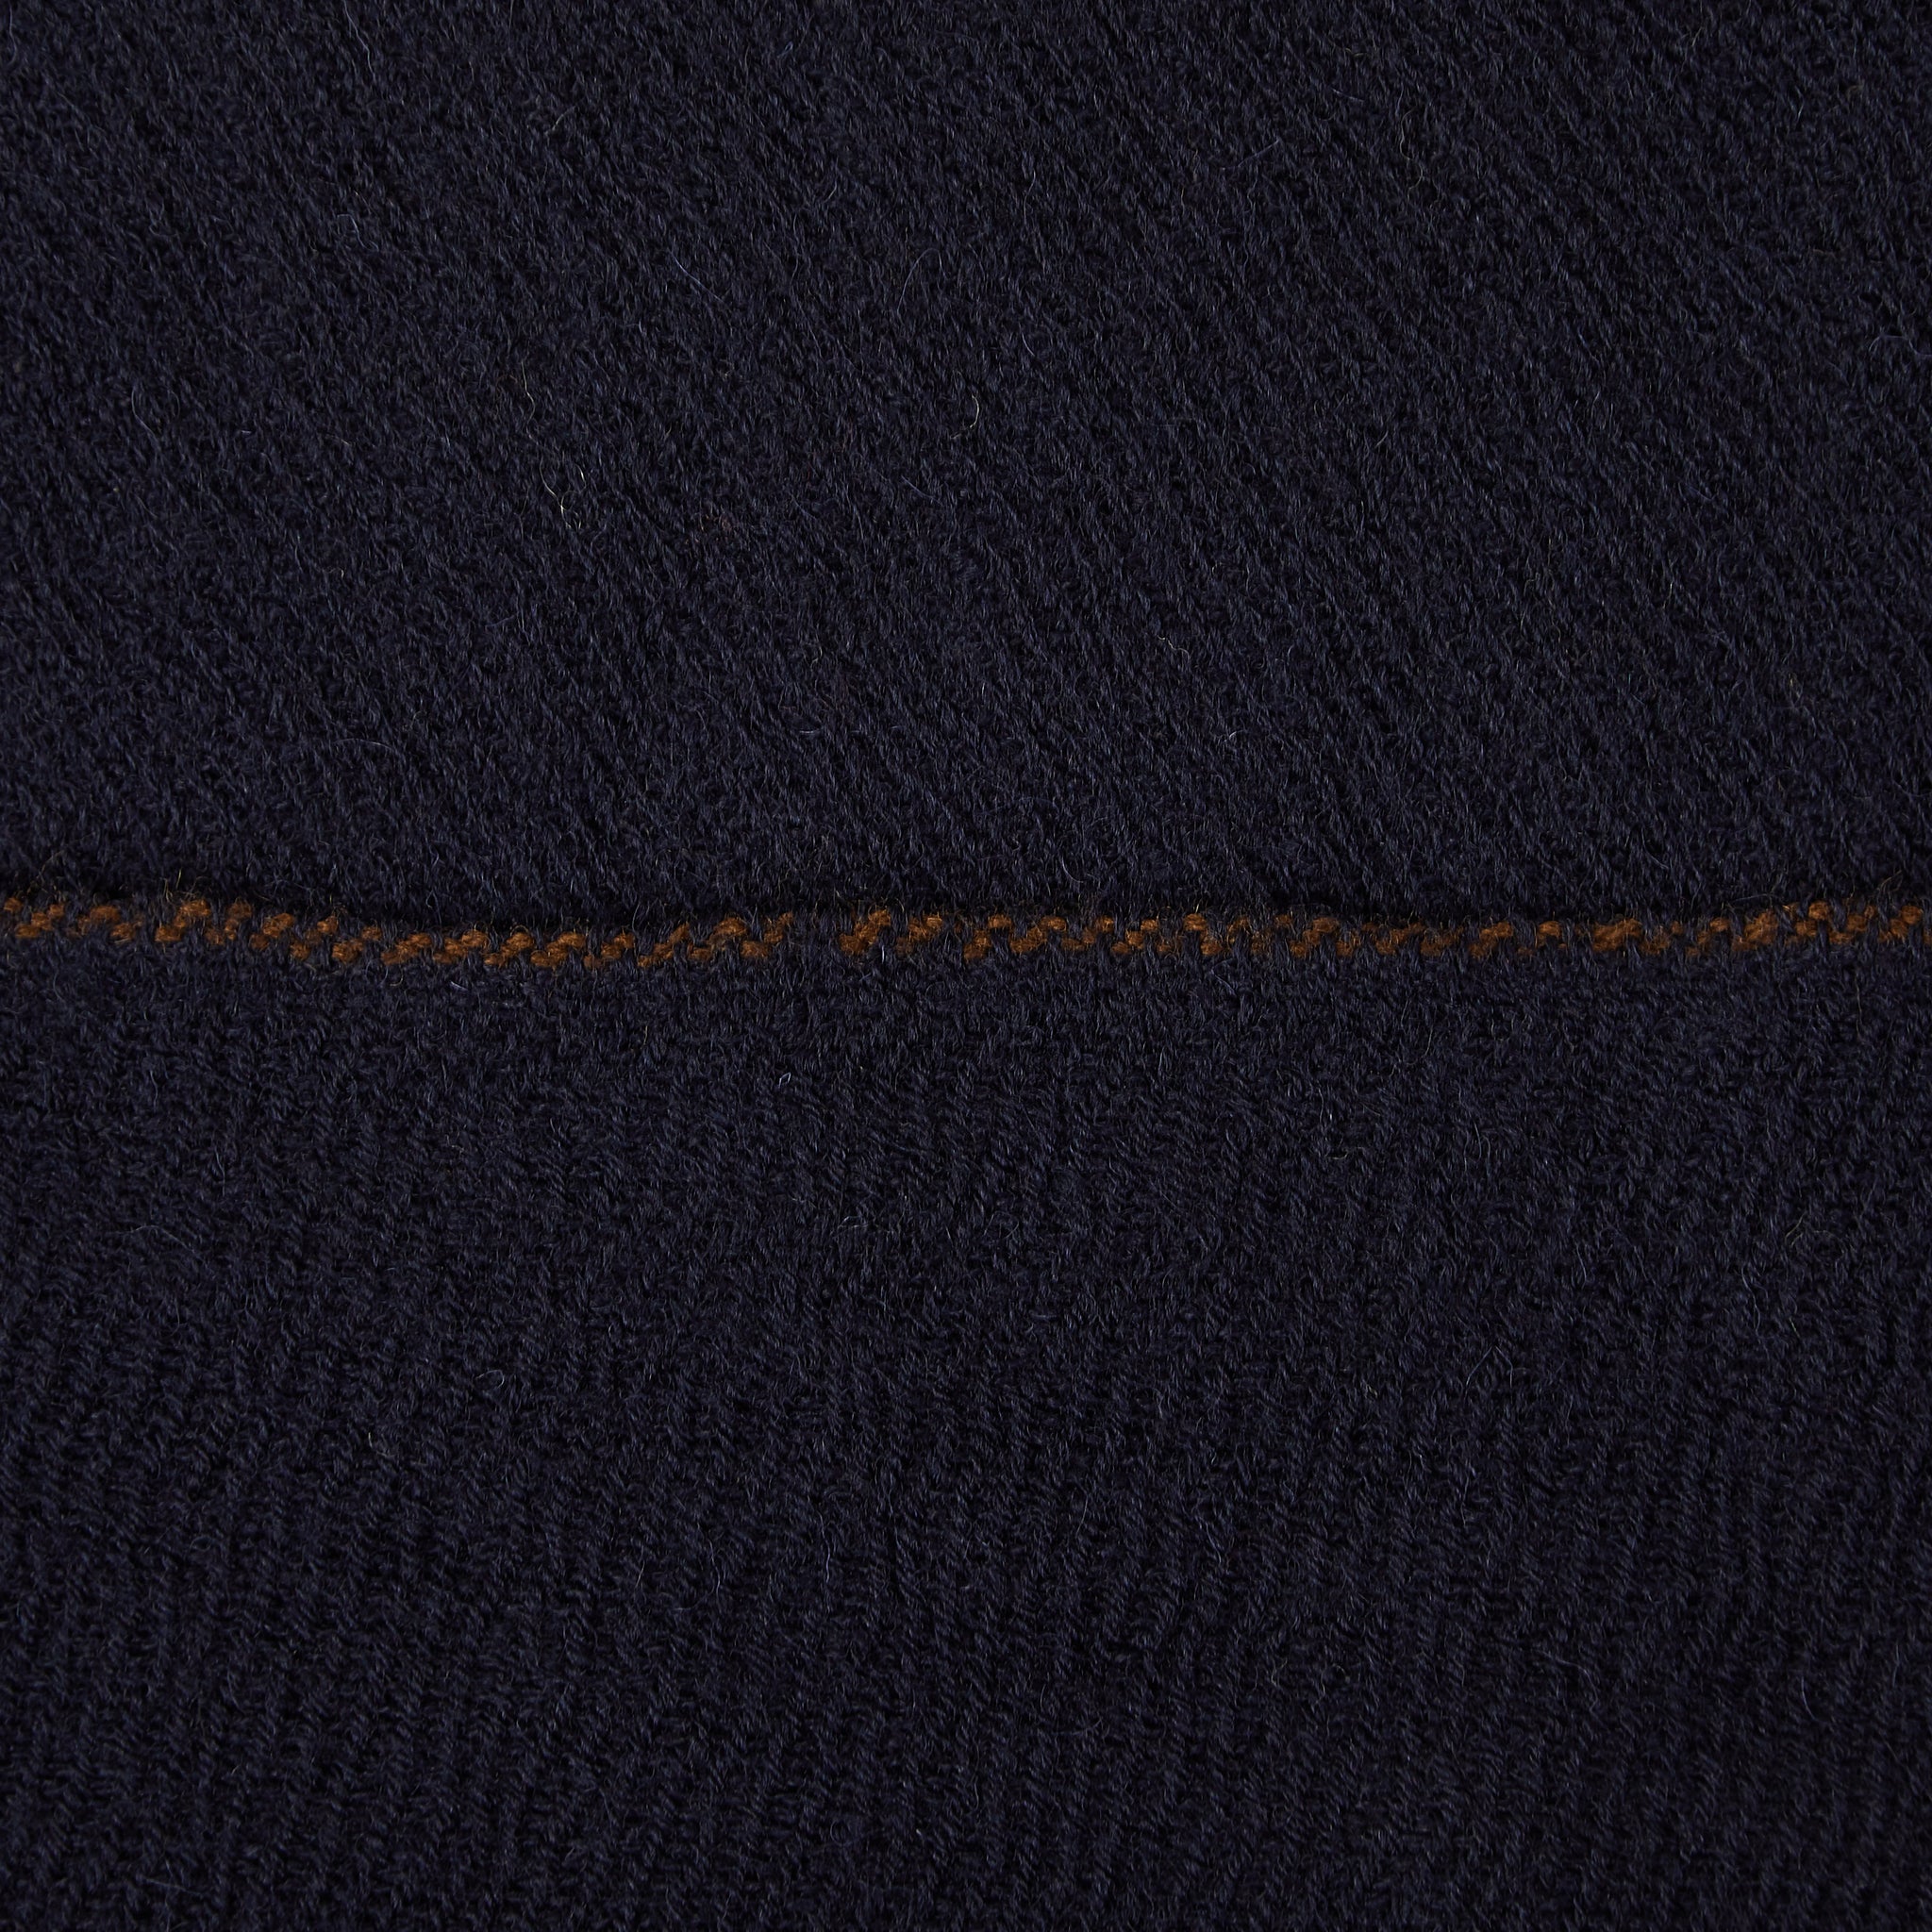 PLAIN GOODS PIPED EDGE SCARF